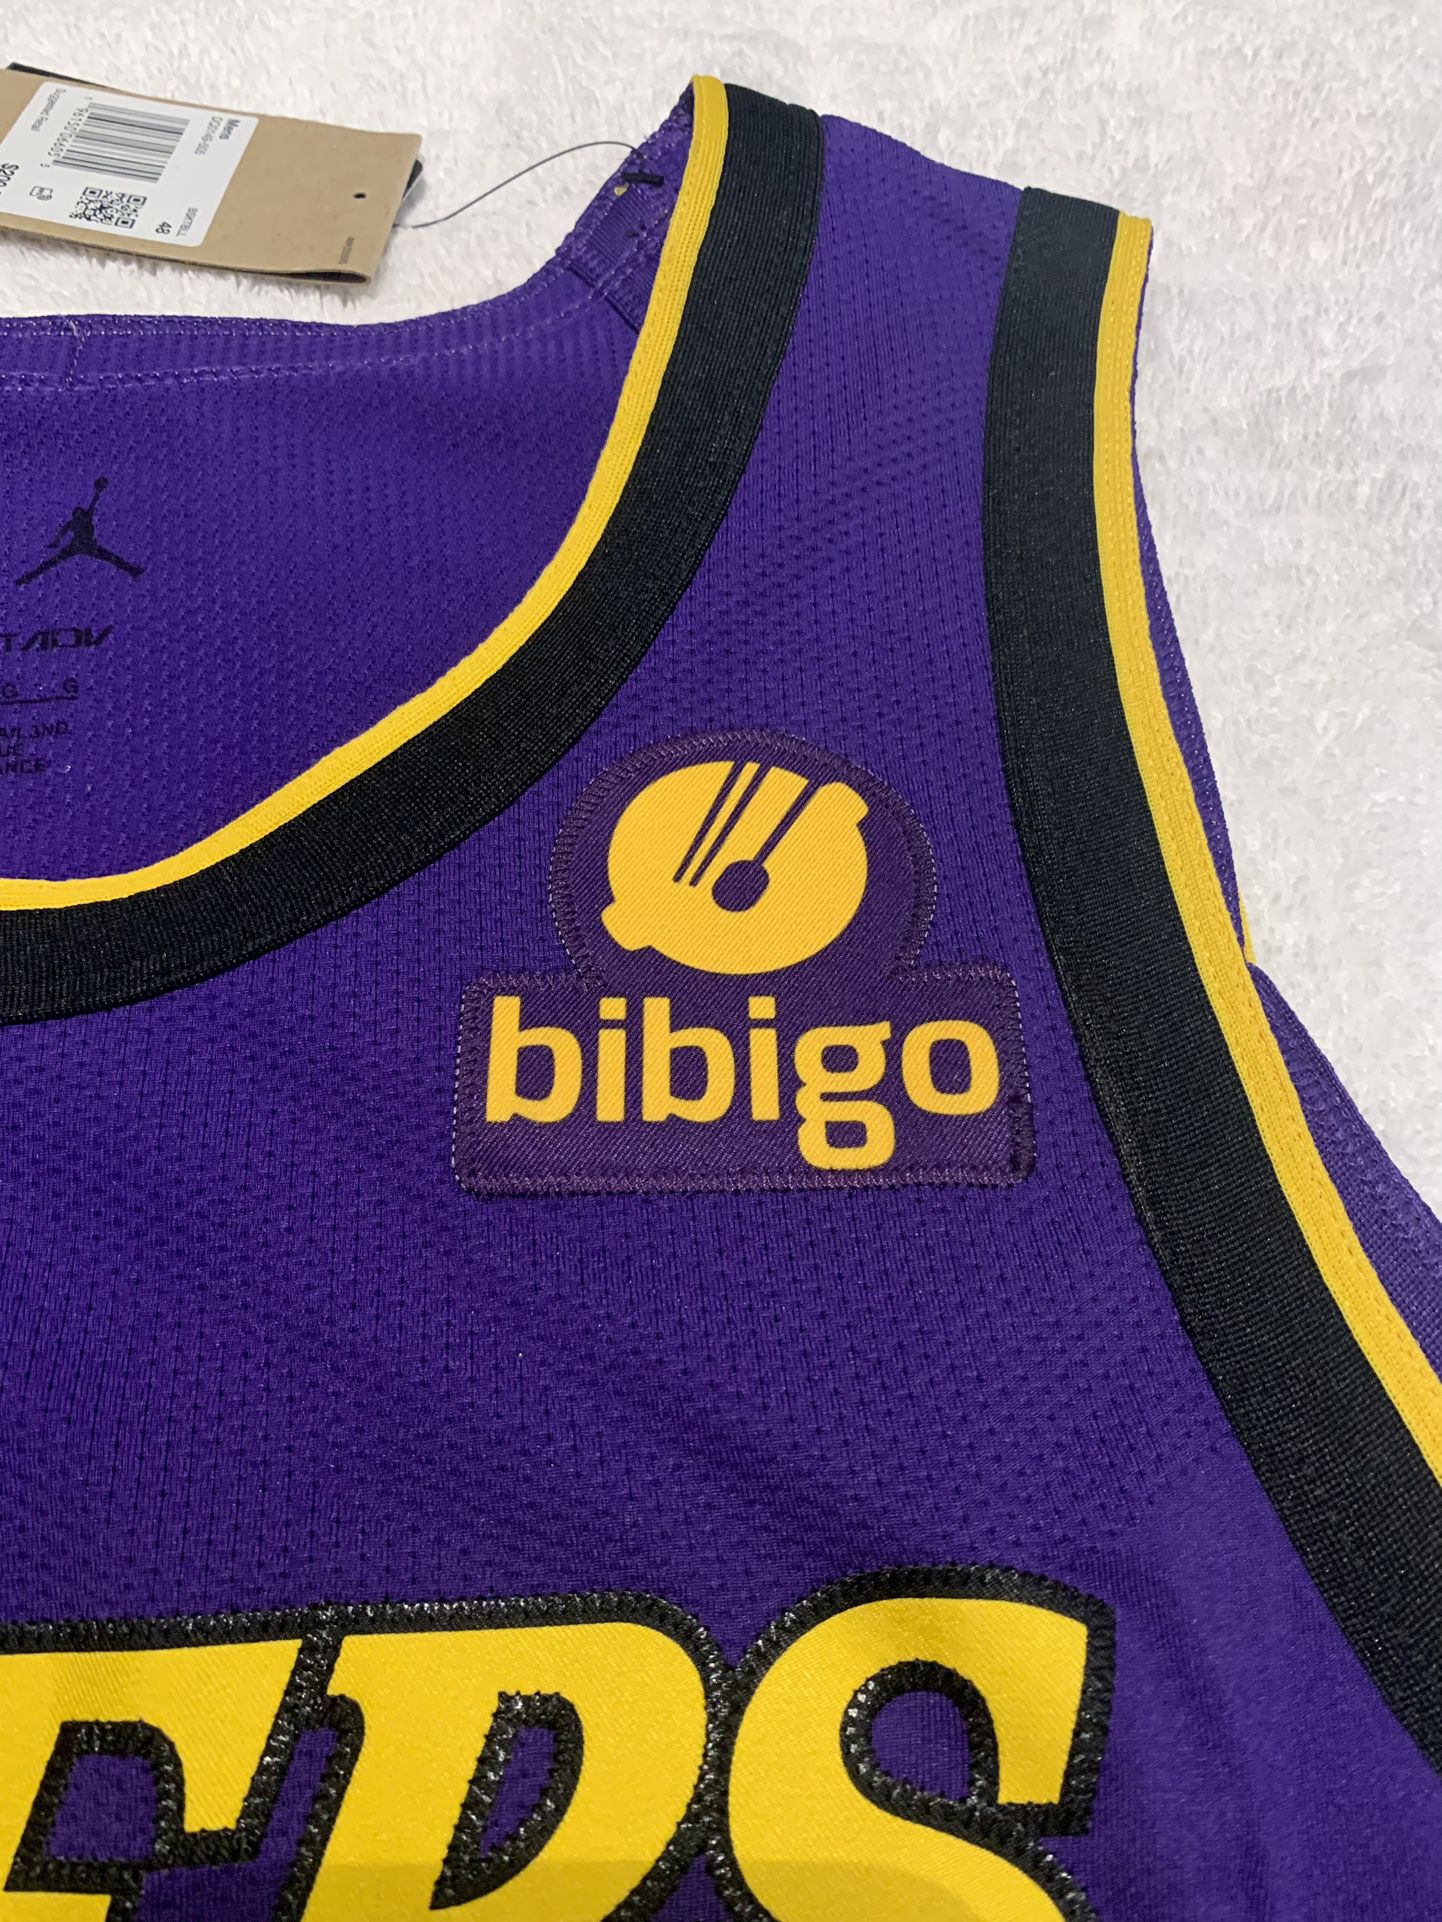 Lebron James #6 Lakers Jersey XL for Sale in Tampa, FL - OfferUp